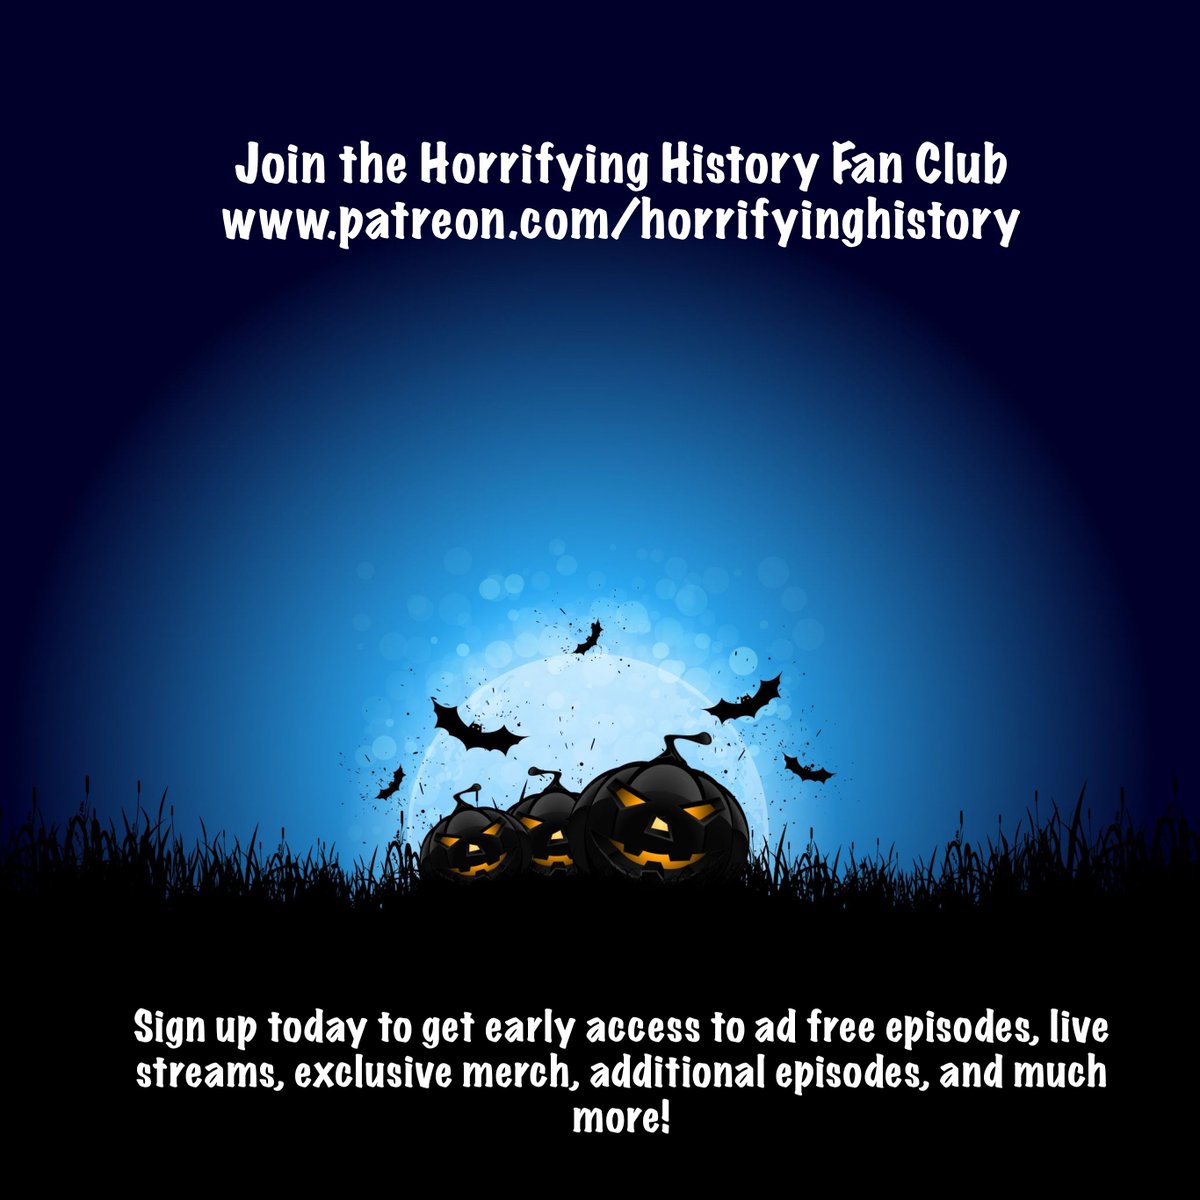 If you dare, step into the bloodcurdling realm of #HorrifyingHistory ☠️ Unleash your inner thrill-seeker & become a member of our bone-chilling #fanclub on #Patreon‼️ Immerse yourself in the haunting tales that will send shivers down your spine &d make your heart race with fear.